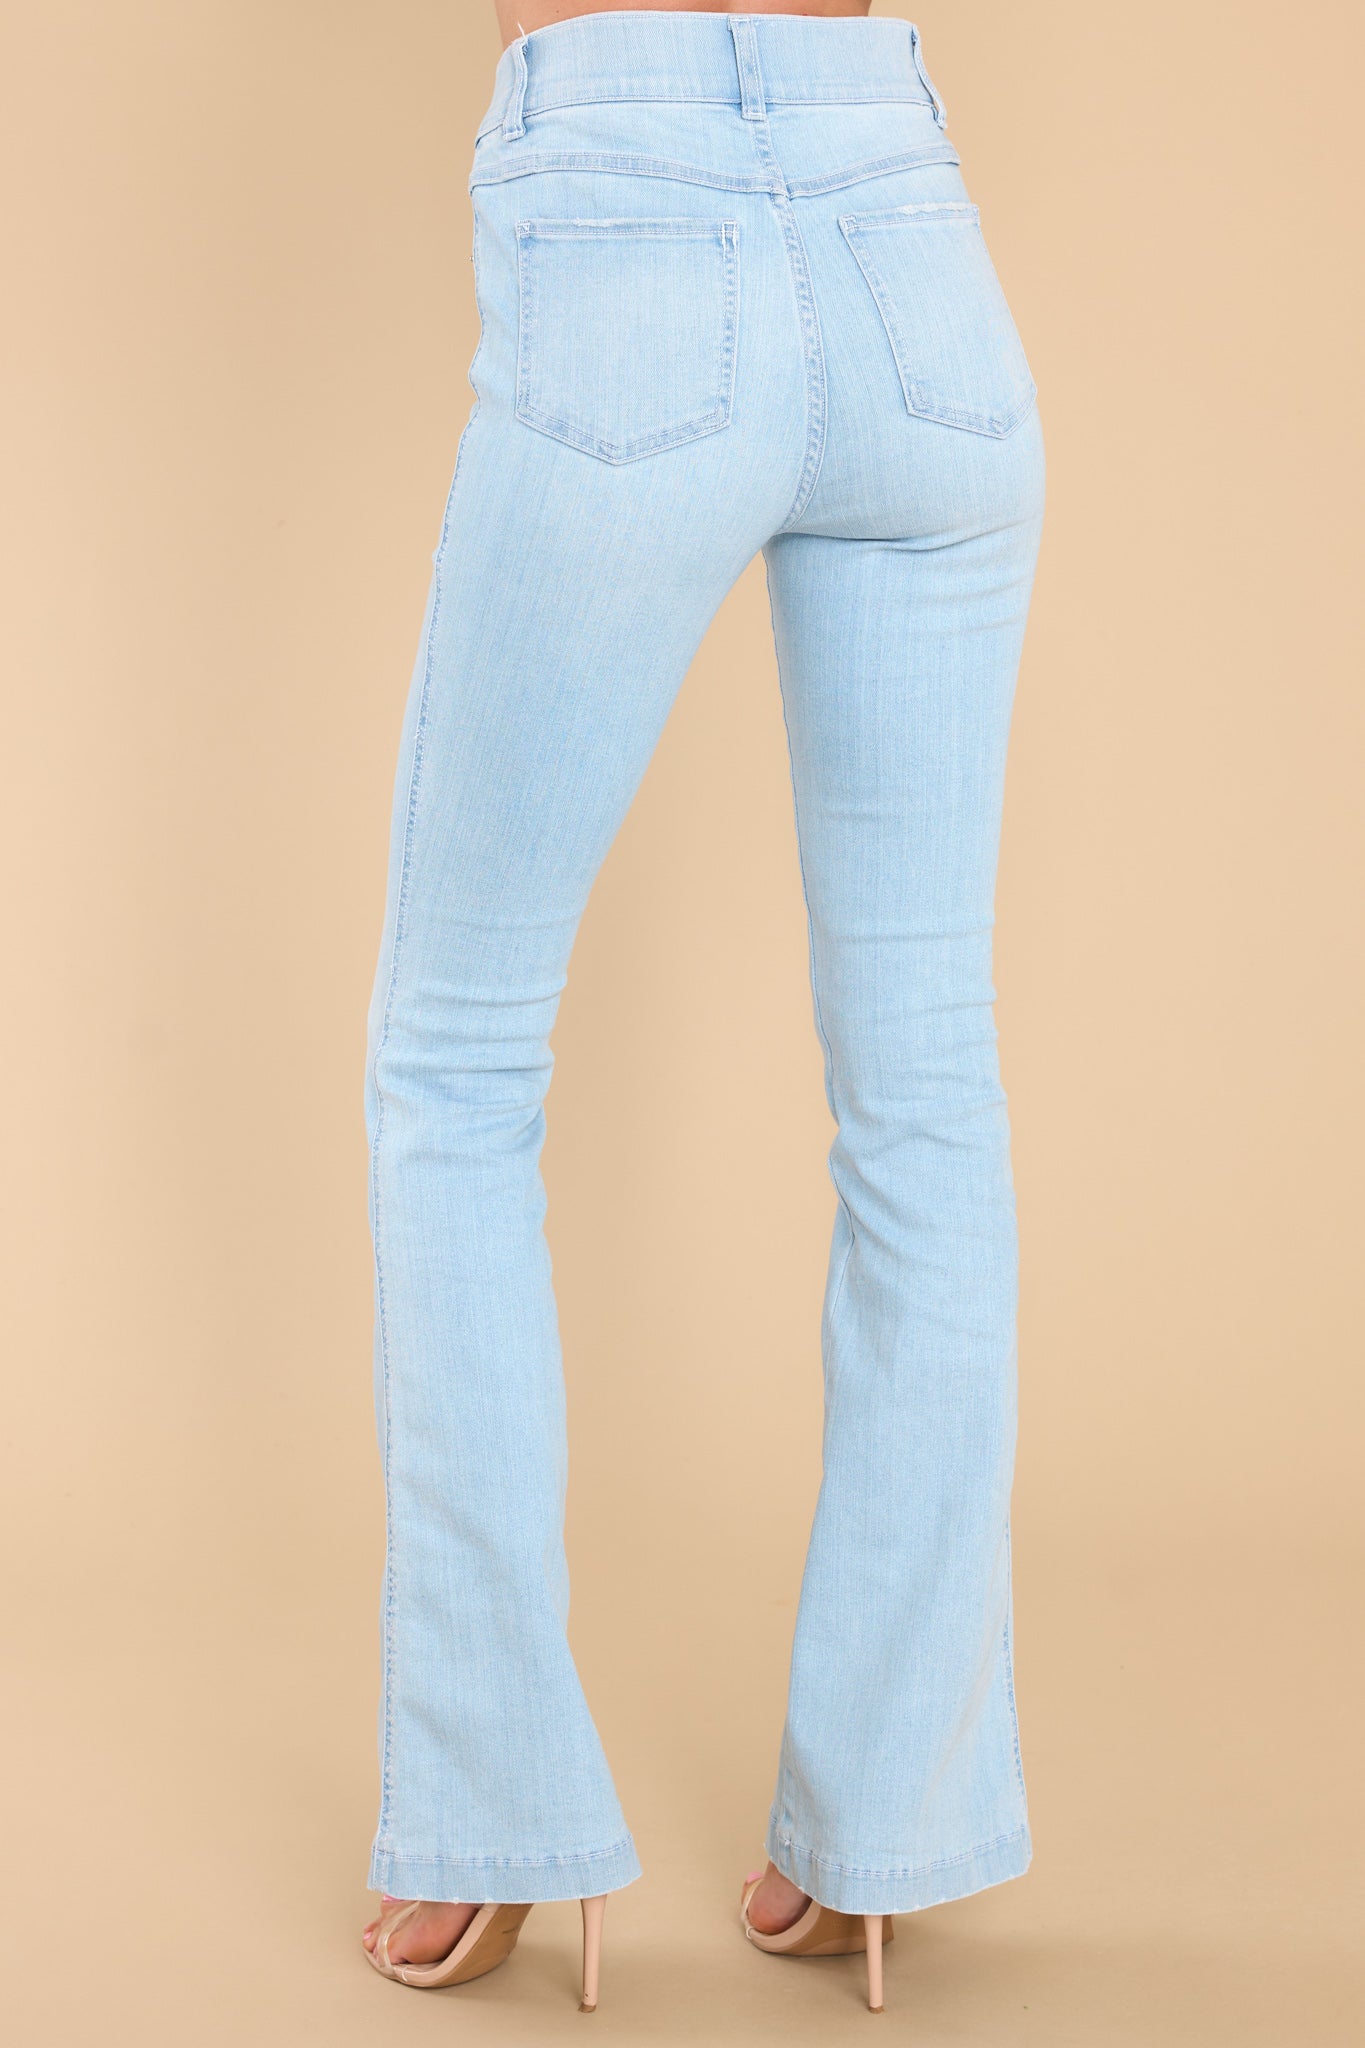 Meet the high-rise flared jeans of your dreams — Covet & Acquire